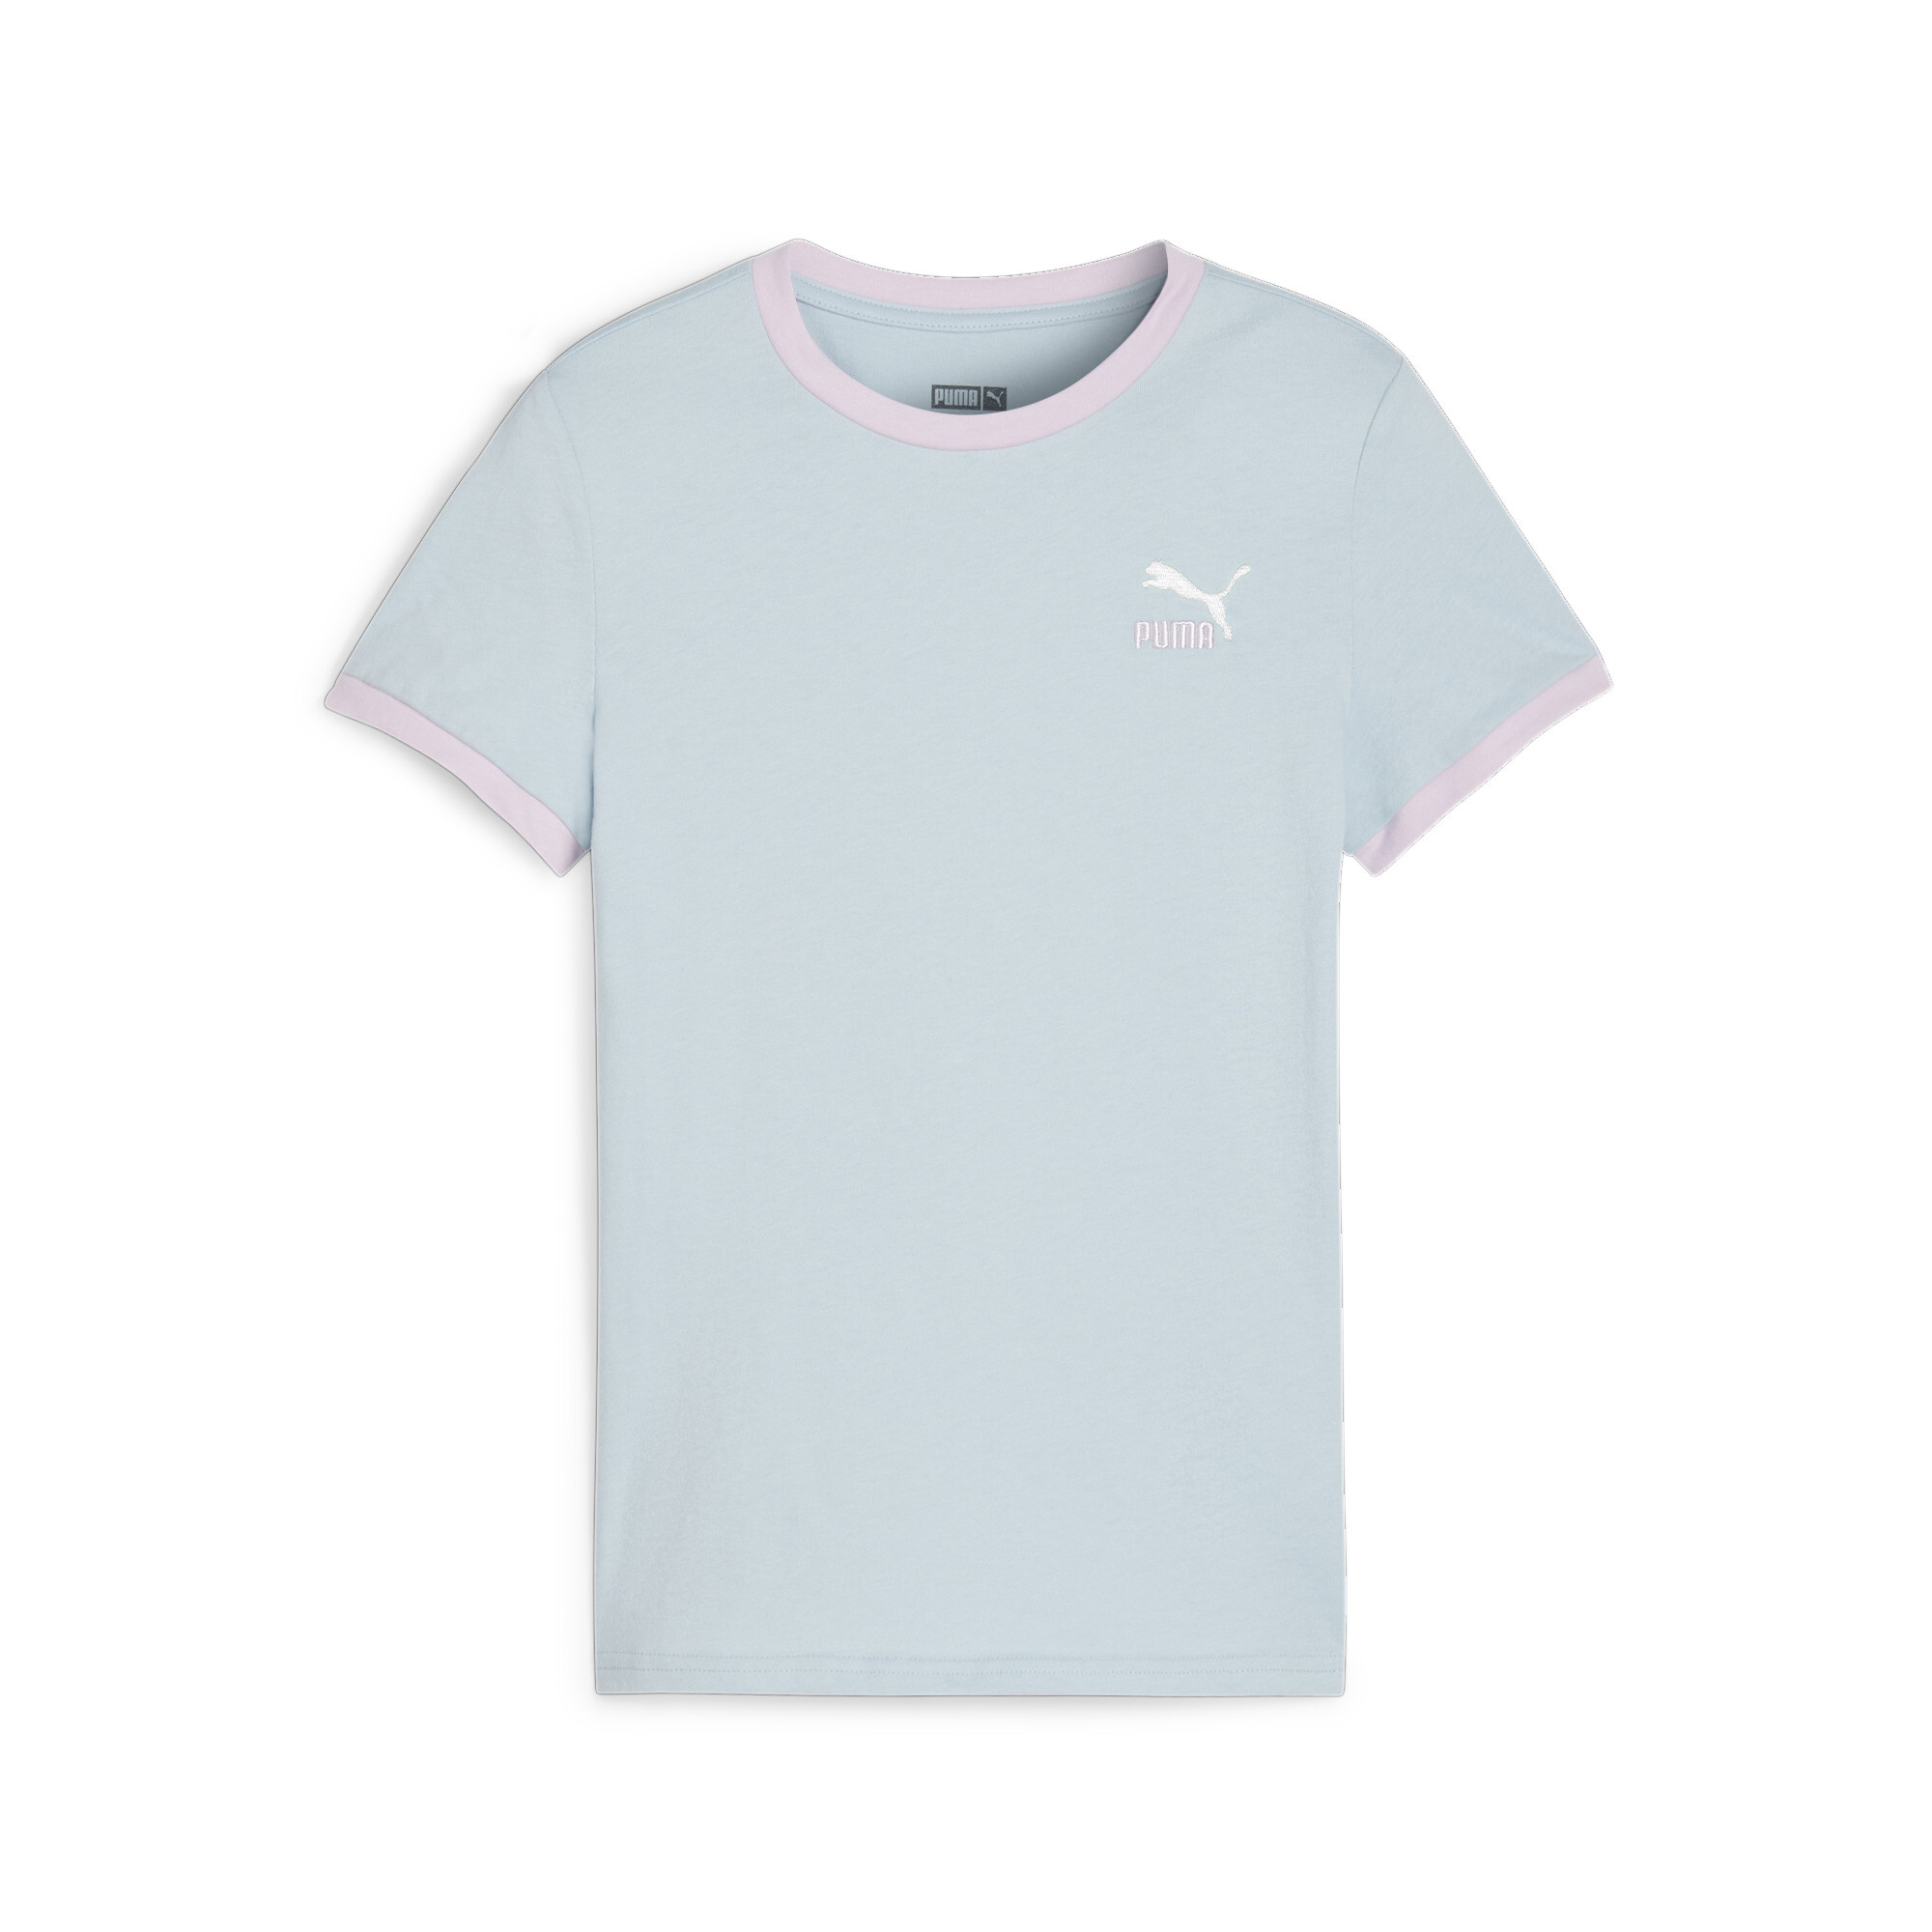 PUMA CLASSICS Match Point T-Shirt In Blue, Size 15-16 Youth